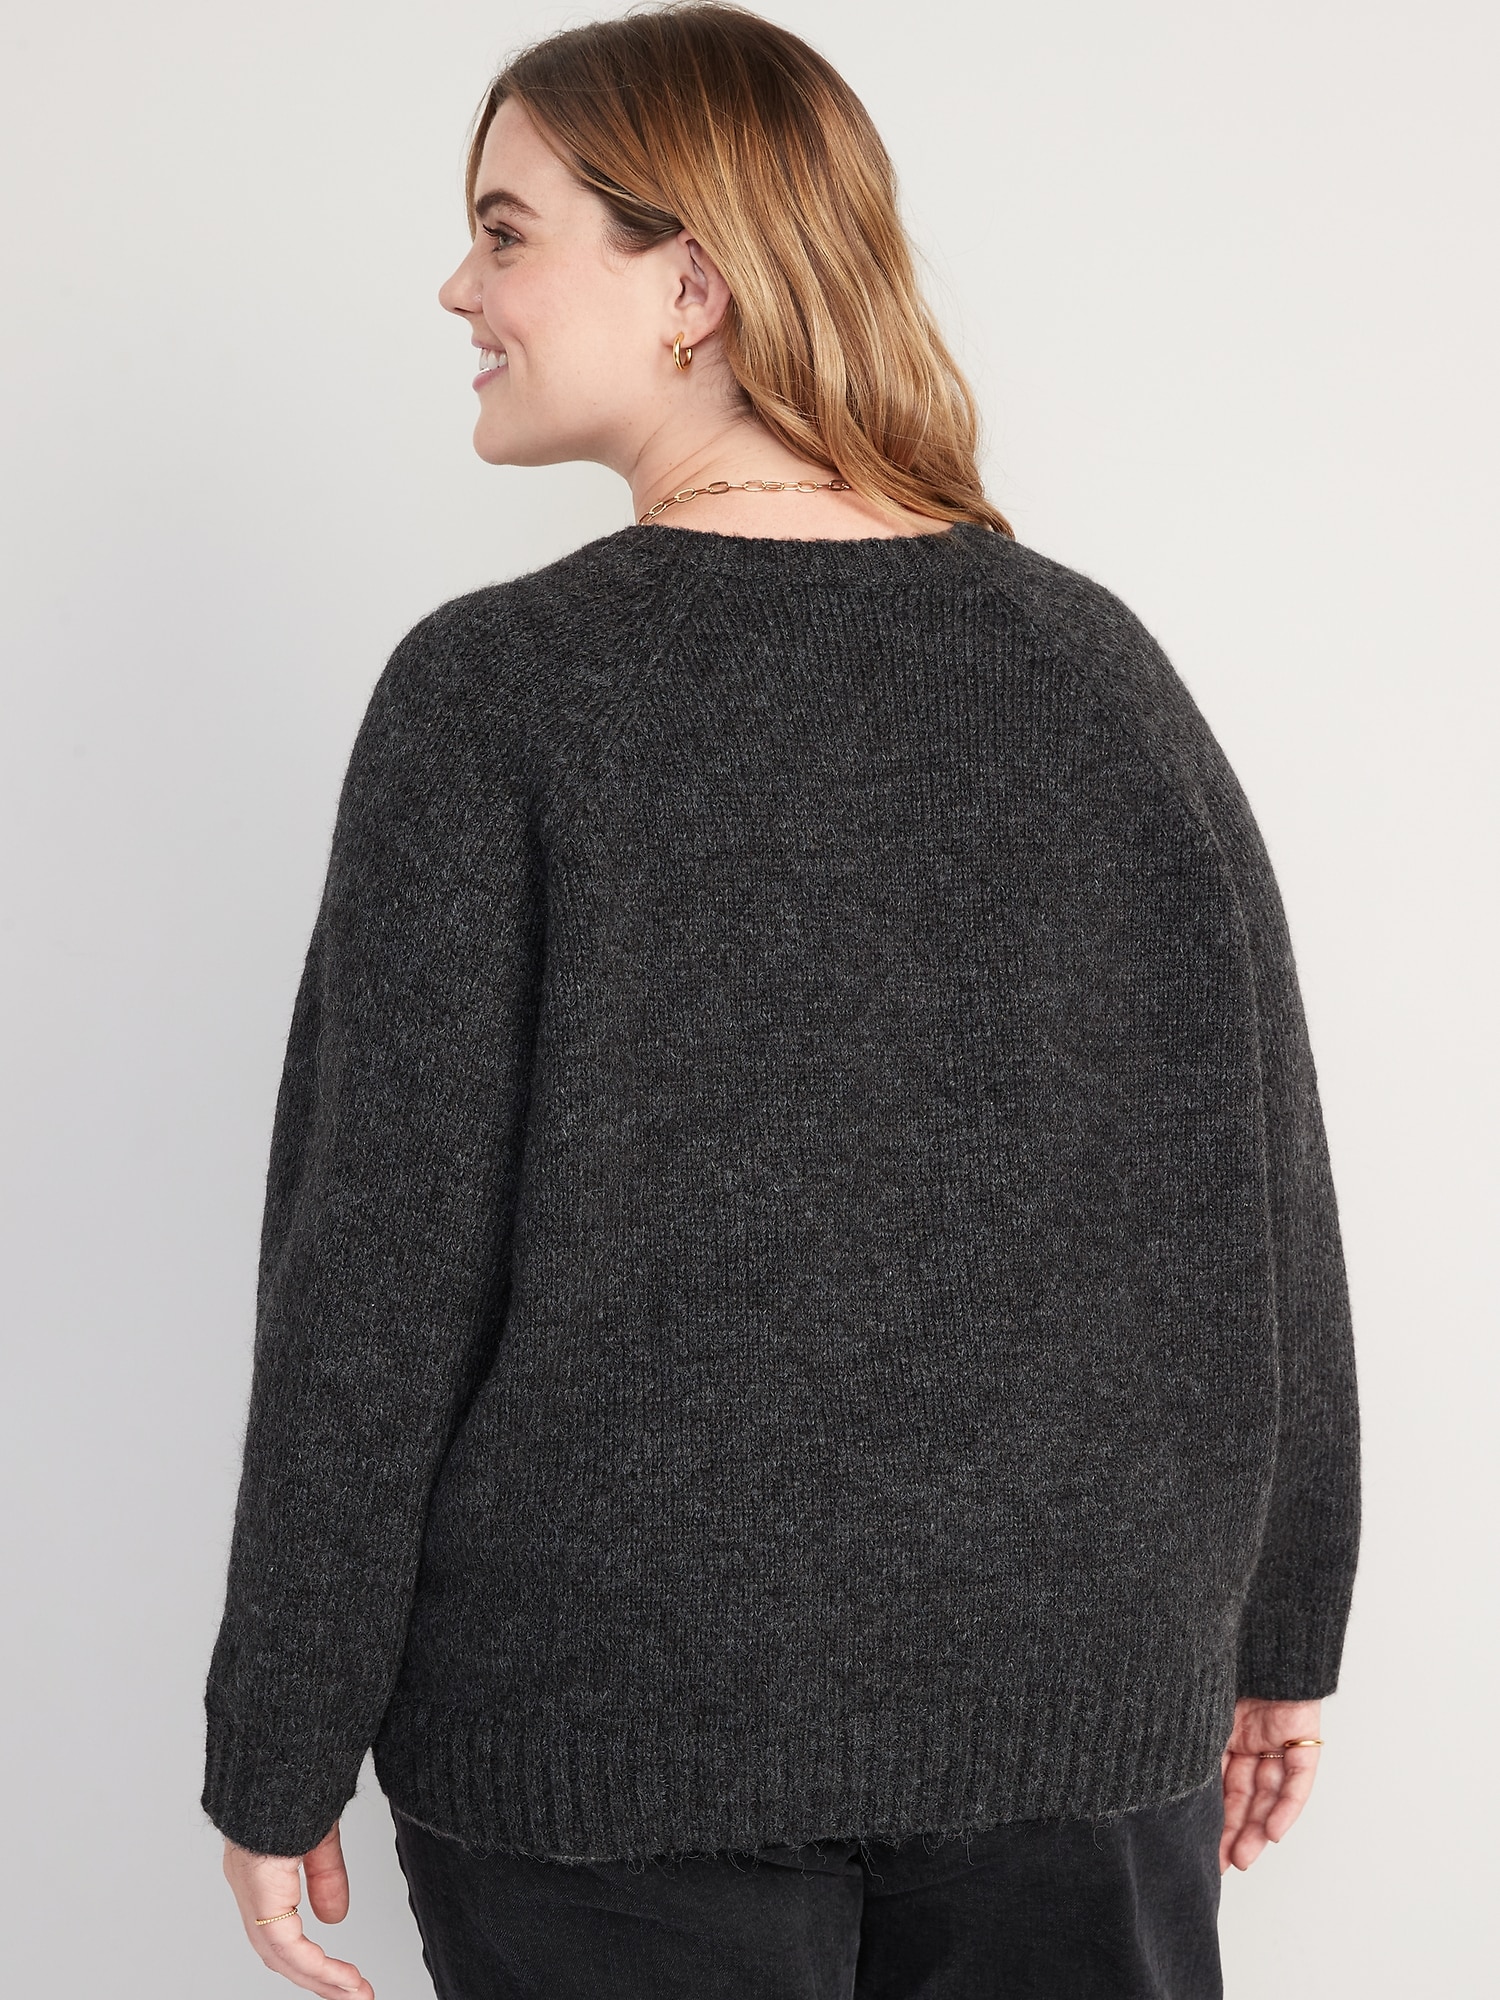 Heathered Cozy Shaker-Stitch Pullover Sweater for Women | Old Navy